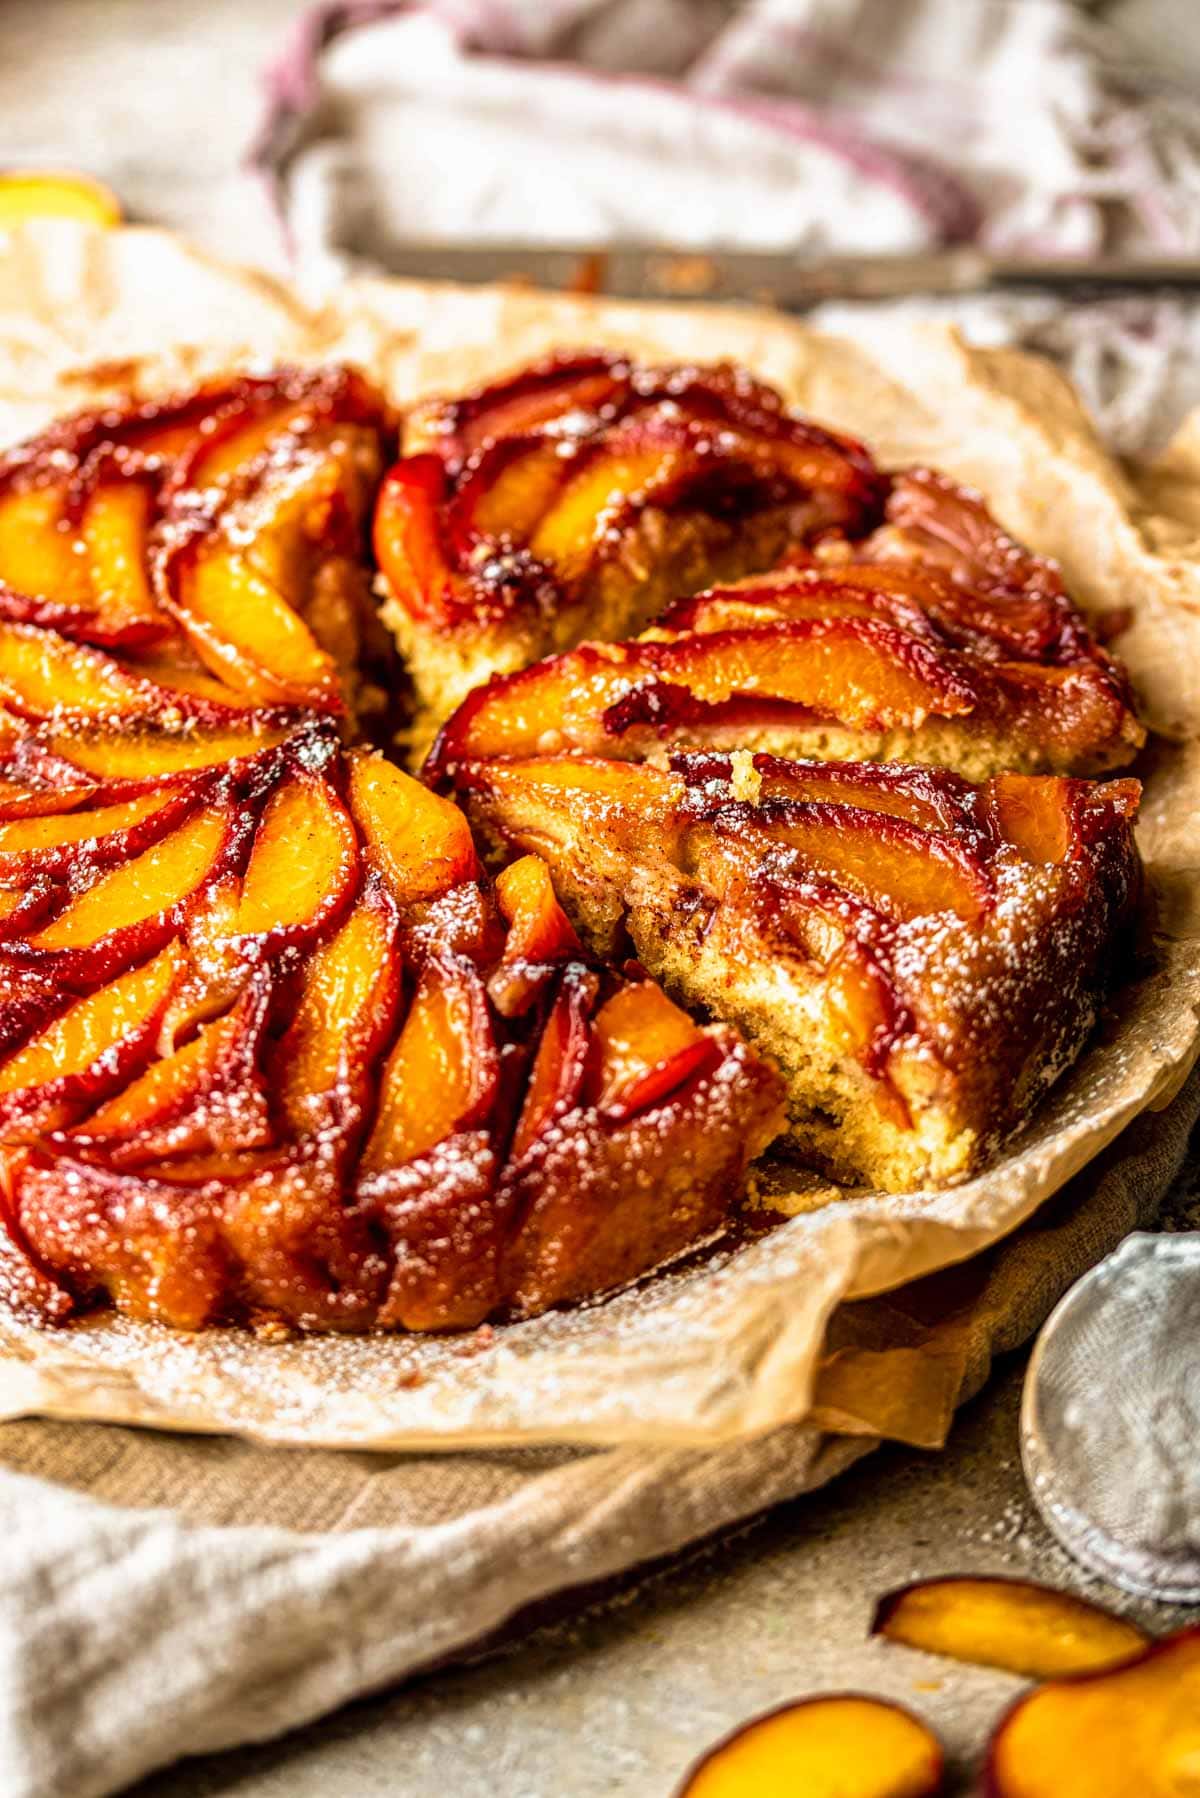 peach upside down cake cut into three slices on brown sheet paper.